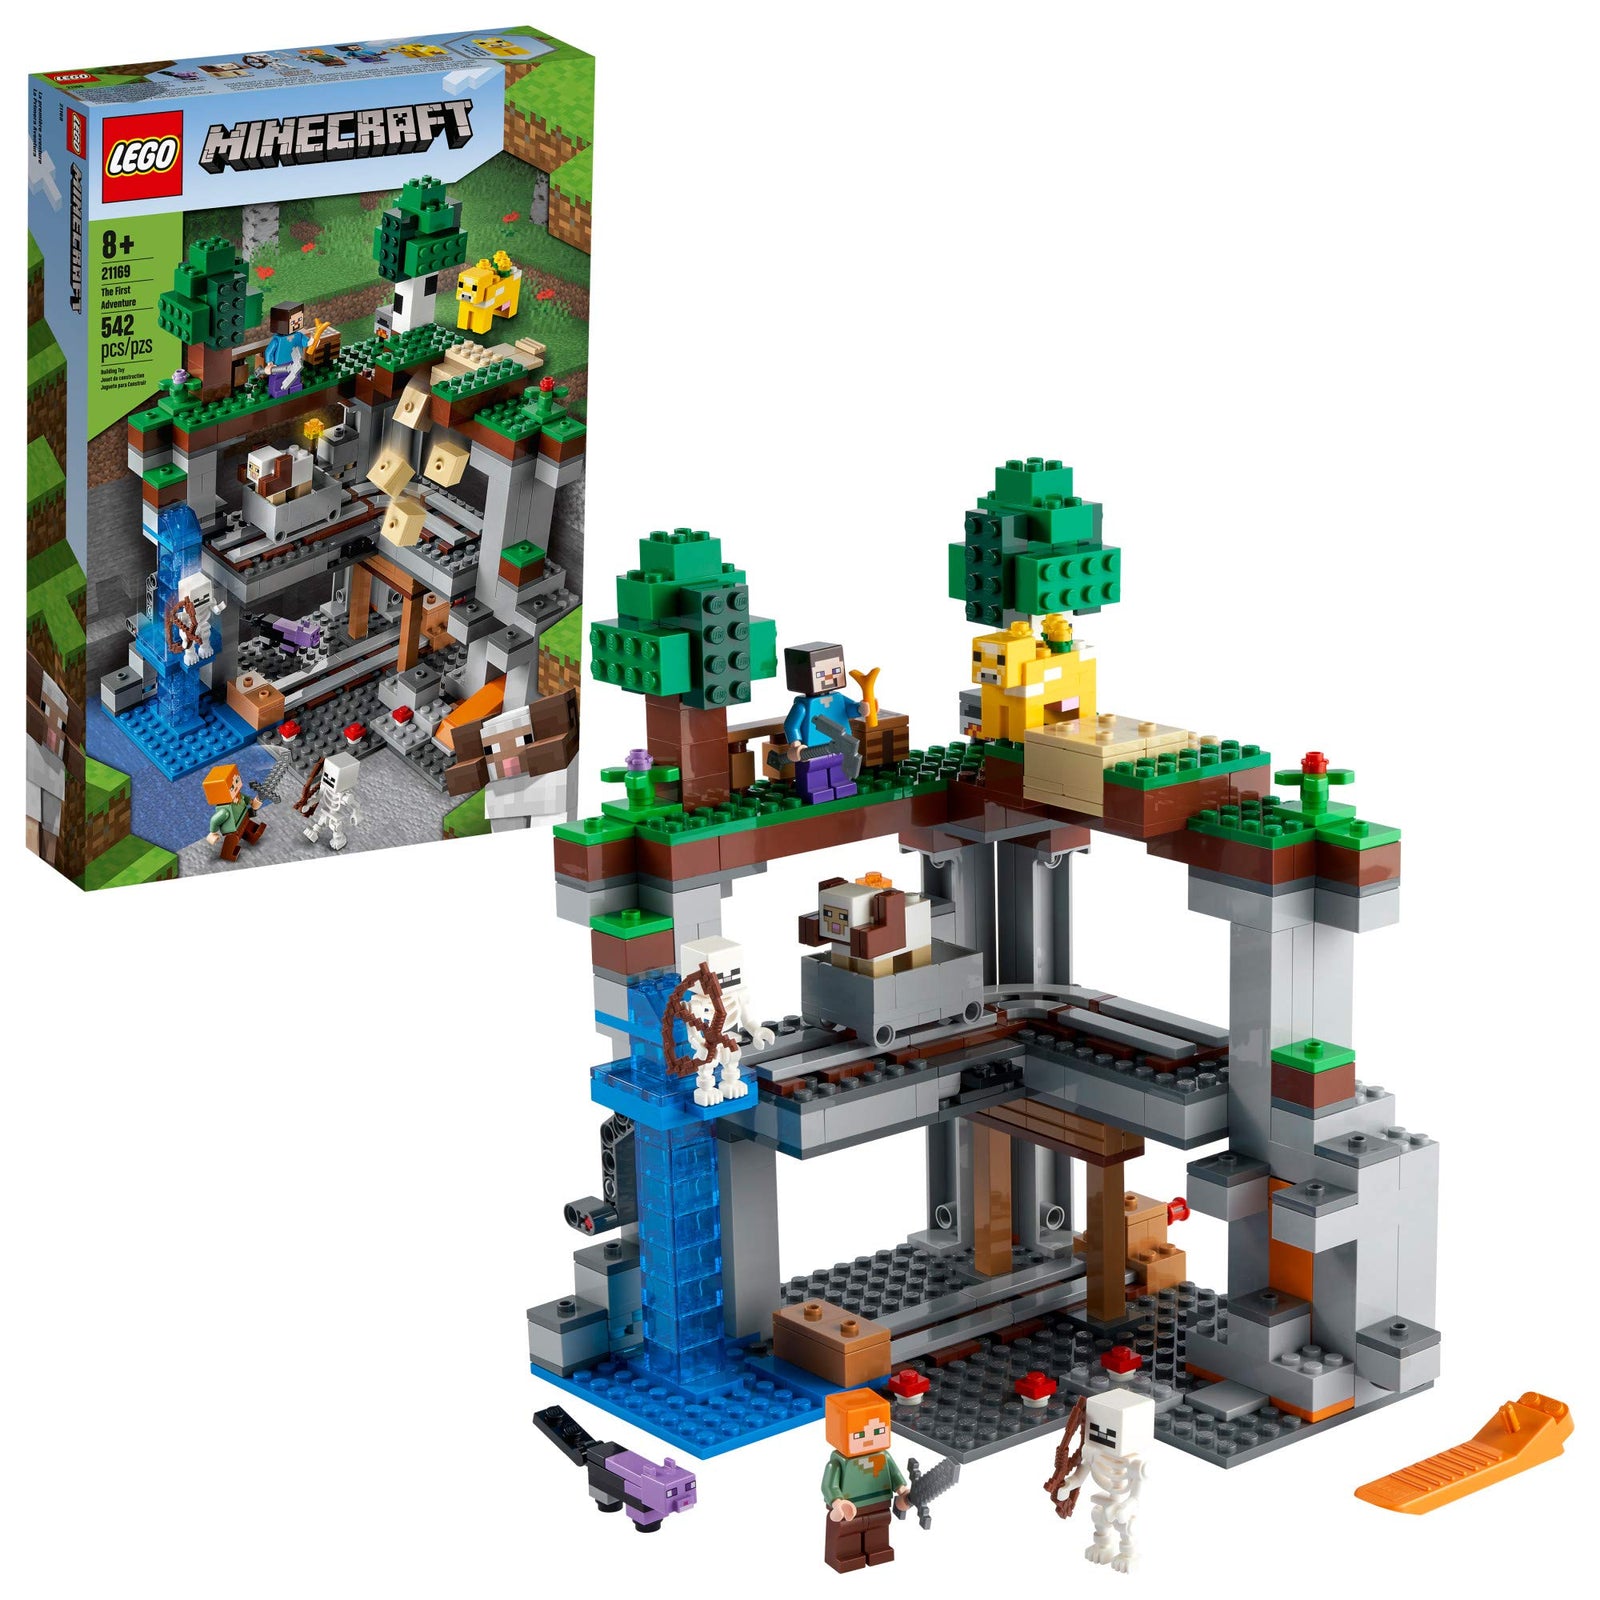 LEGO Minecraft The First Adventure 21169 Hands-On Minecraft Playset; Fun Toy Featuring Steve, Alex, a Skeleton, Dyed Cat, Moobloom and Horned Sheep, New 2021 (542 Pieces)